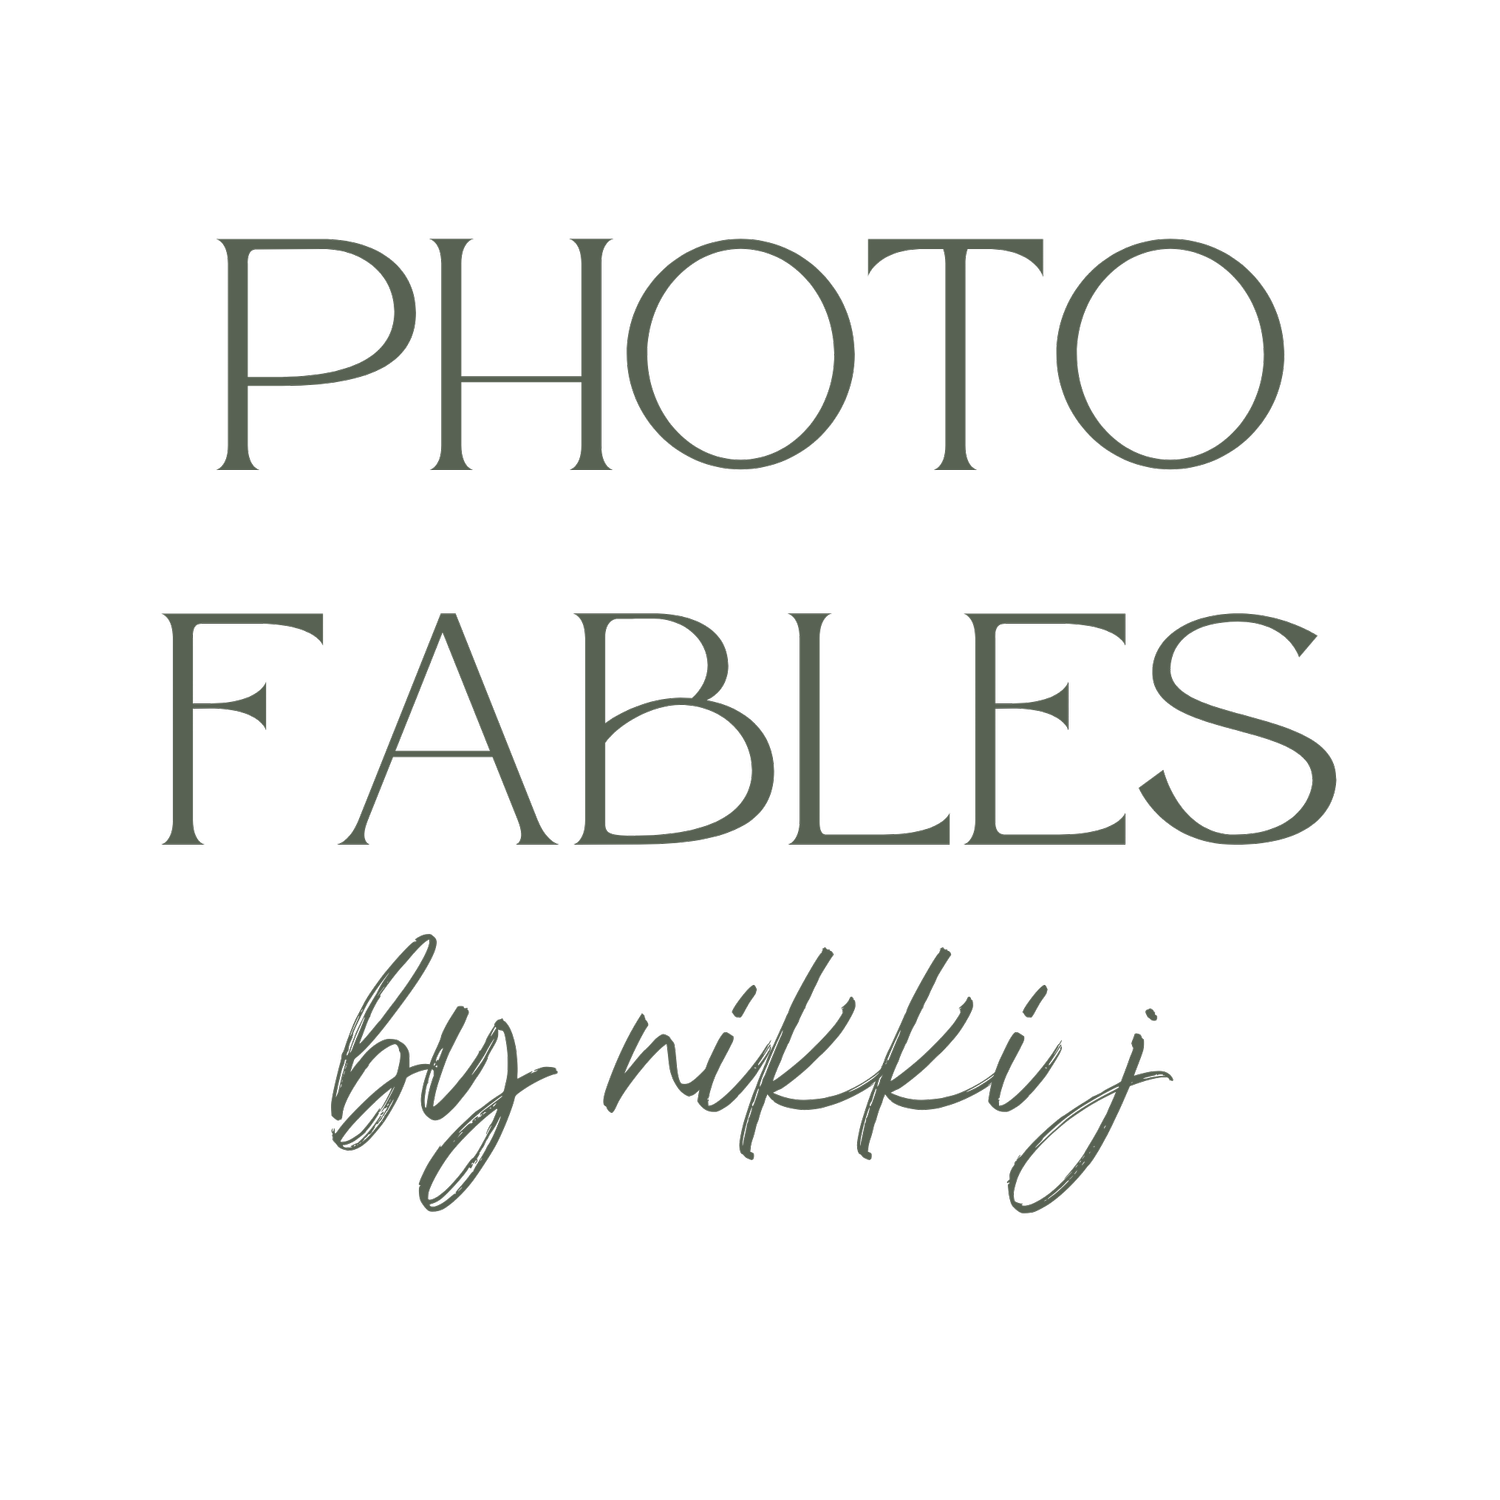 Photo Fables